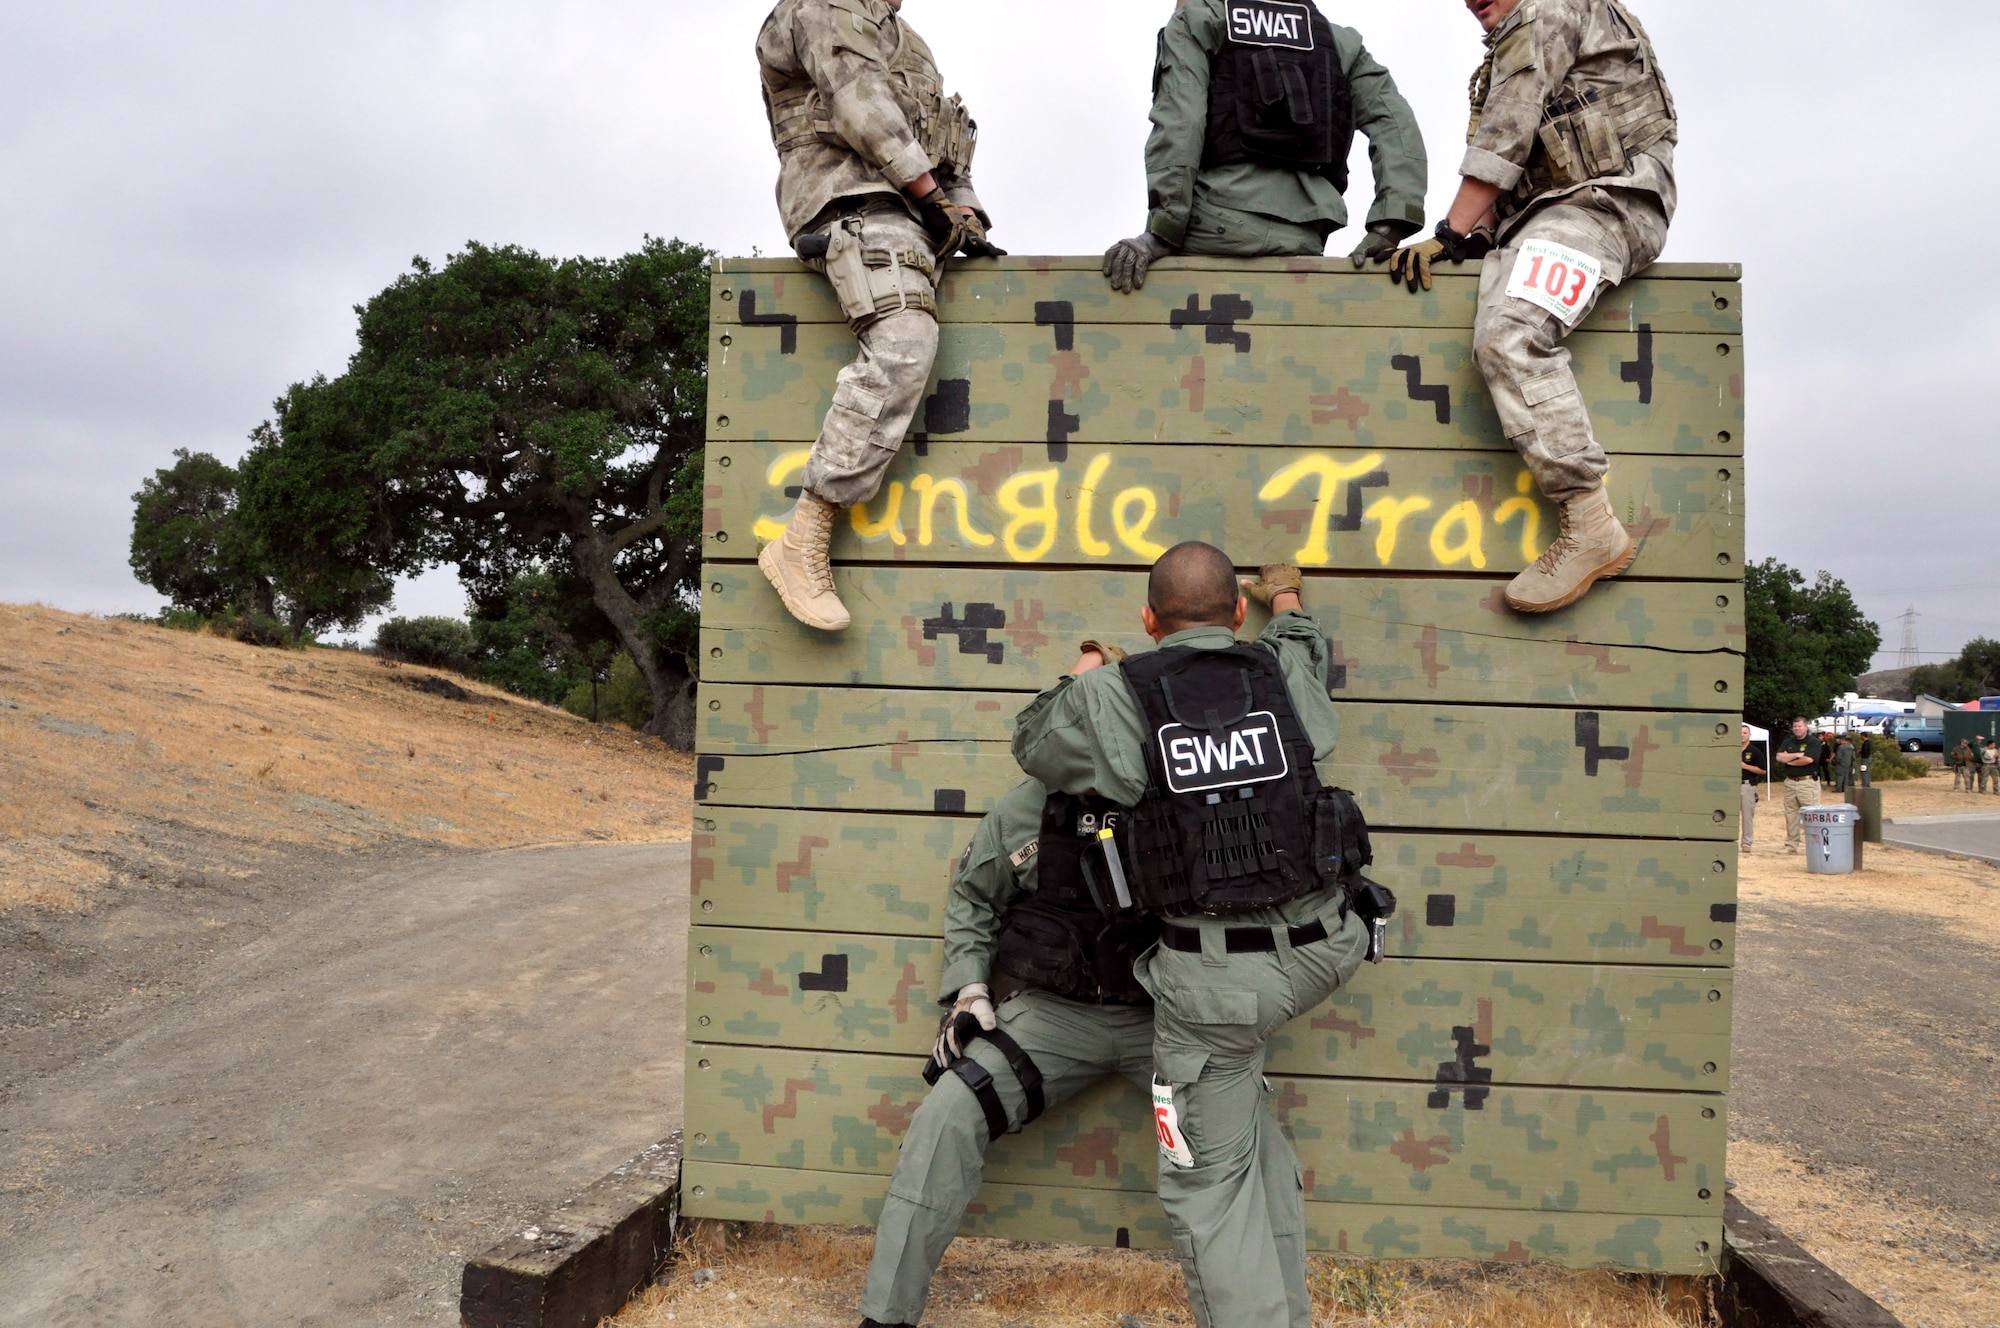 Members of the Travis Emergency Services Team help each other scale a wall in the Jungle Trail course last week in San Jose. The Airmen were competing in the Best in the West SWAT competition against 35 other SWAT teams from the West Coast.(U.S. Air Force photo/Staff Sgt. Patrick Harrower)